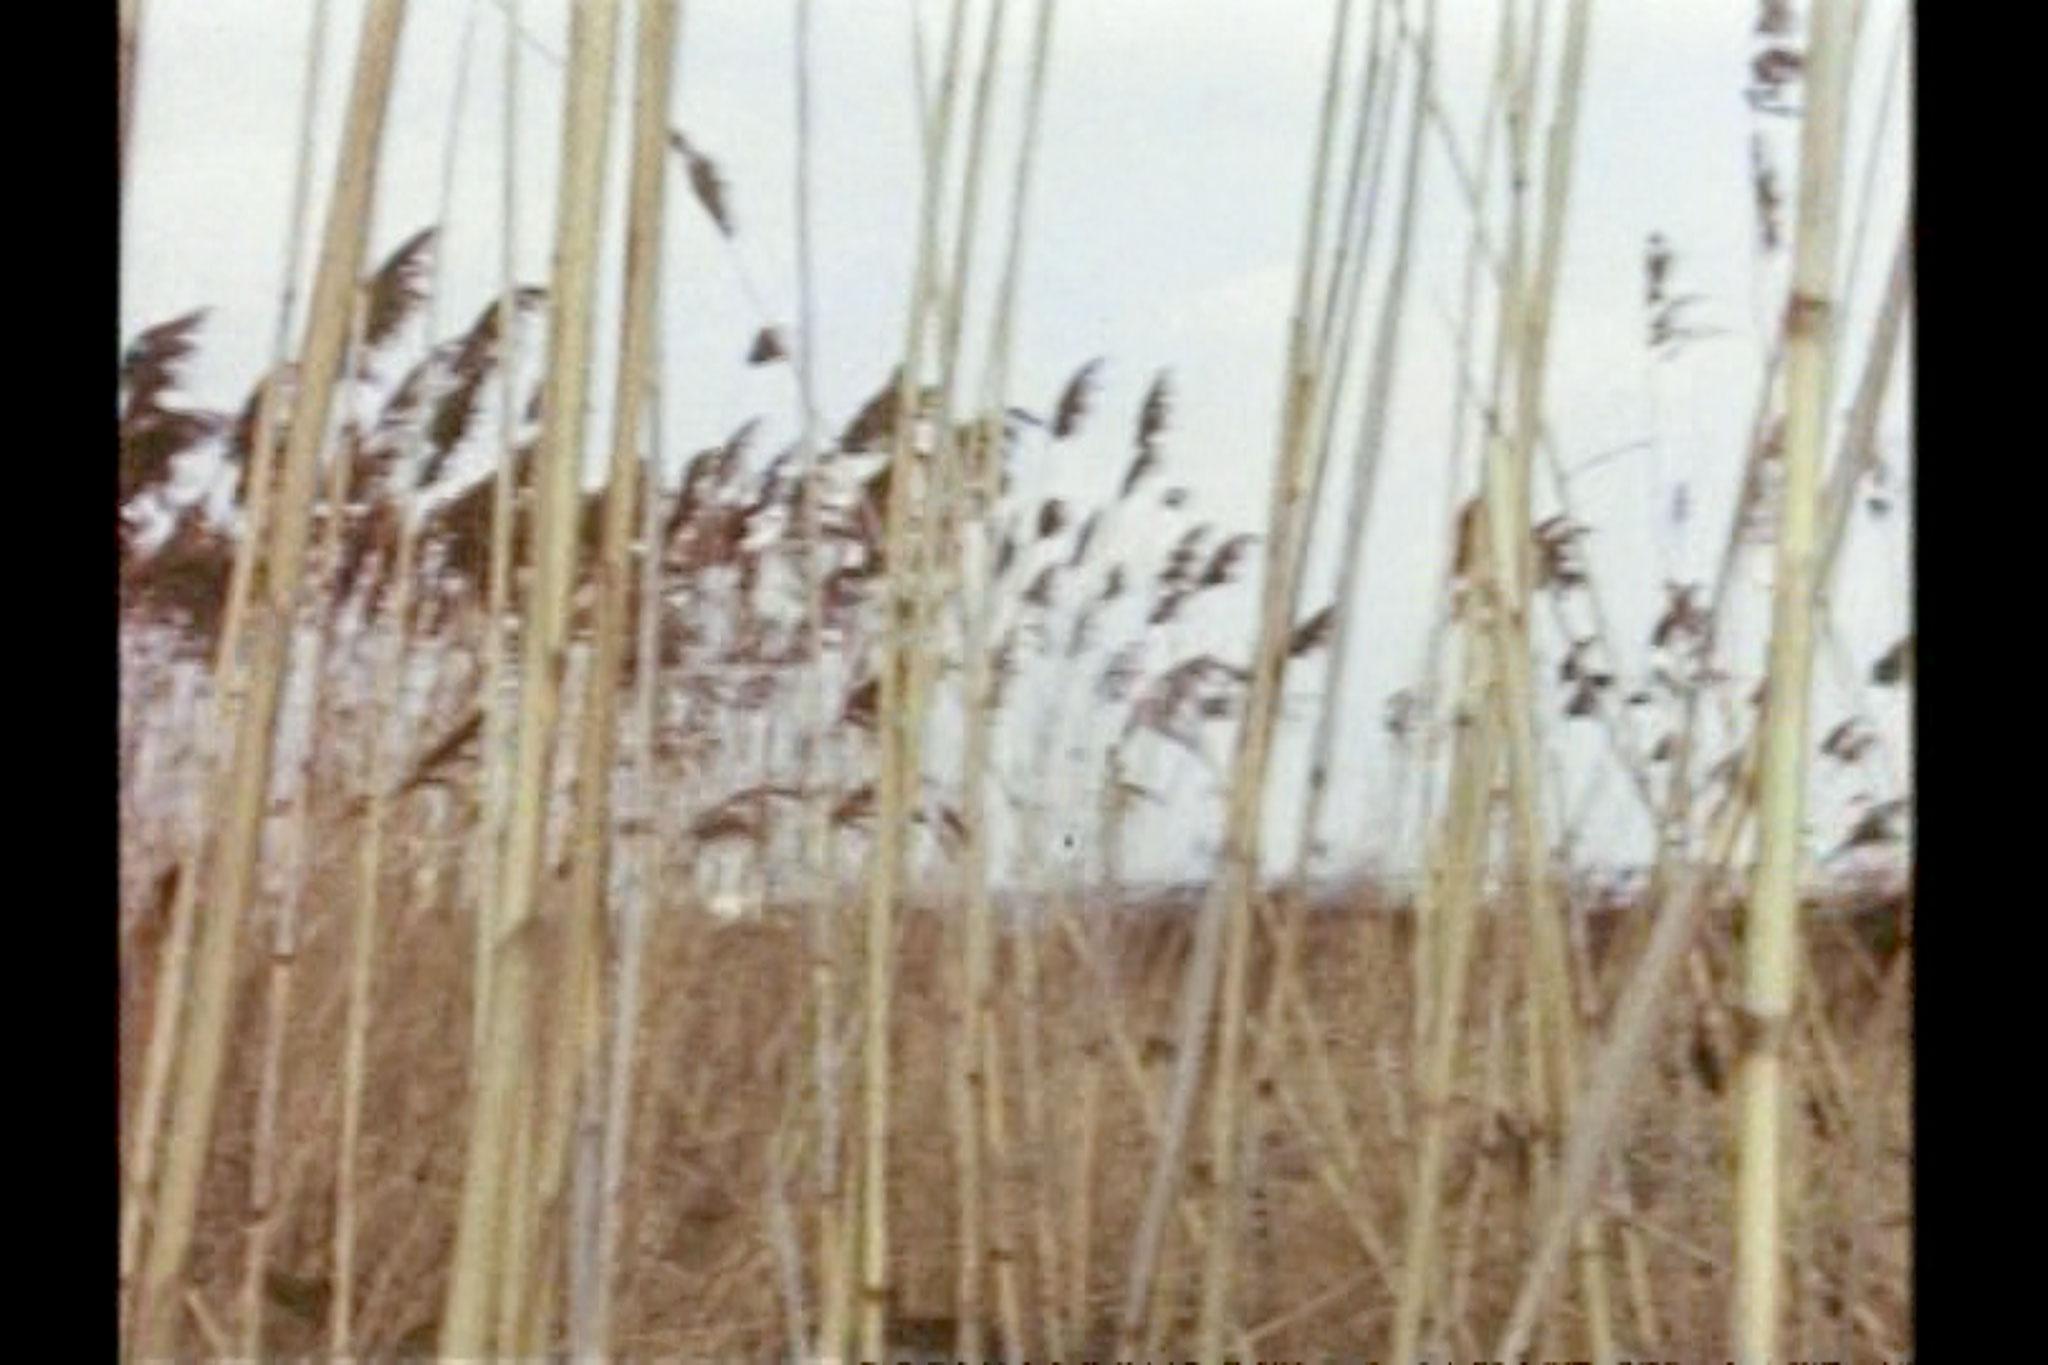 Chaotic image of many criss-crossing reeds.